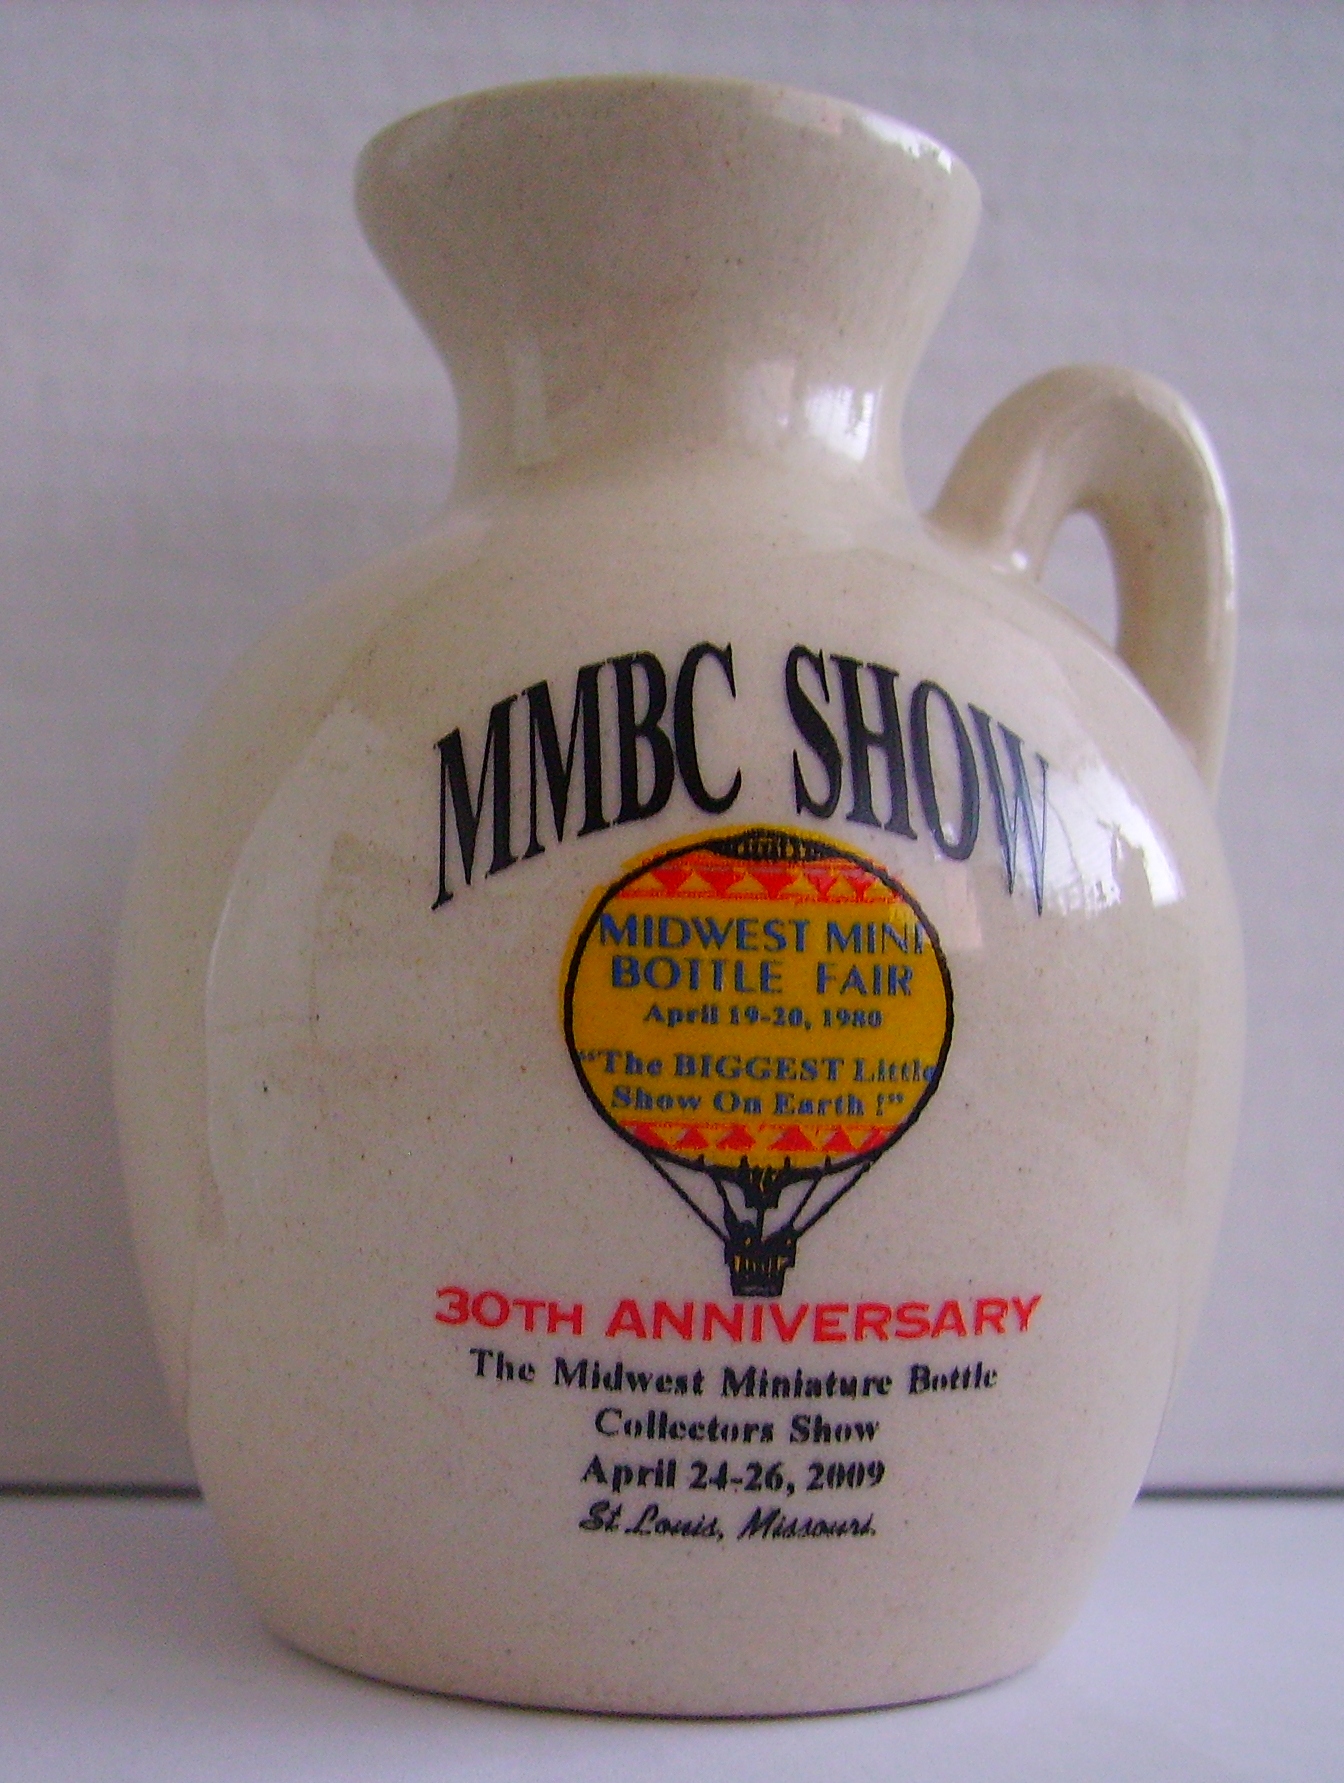 30th Anniversary Midwest Miniature Bottle Club Jug – Front side